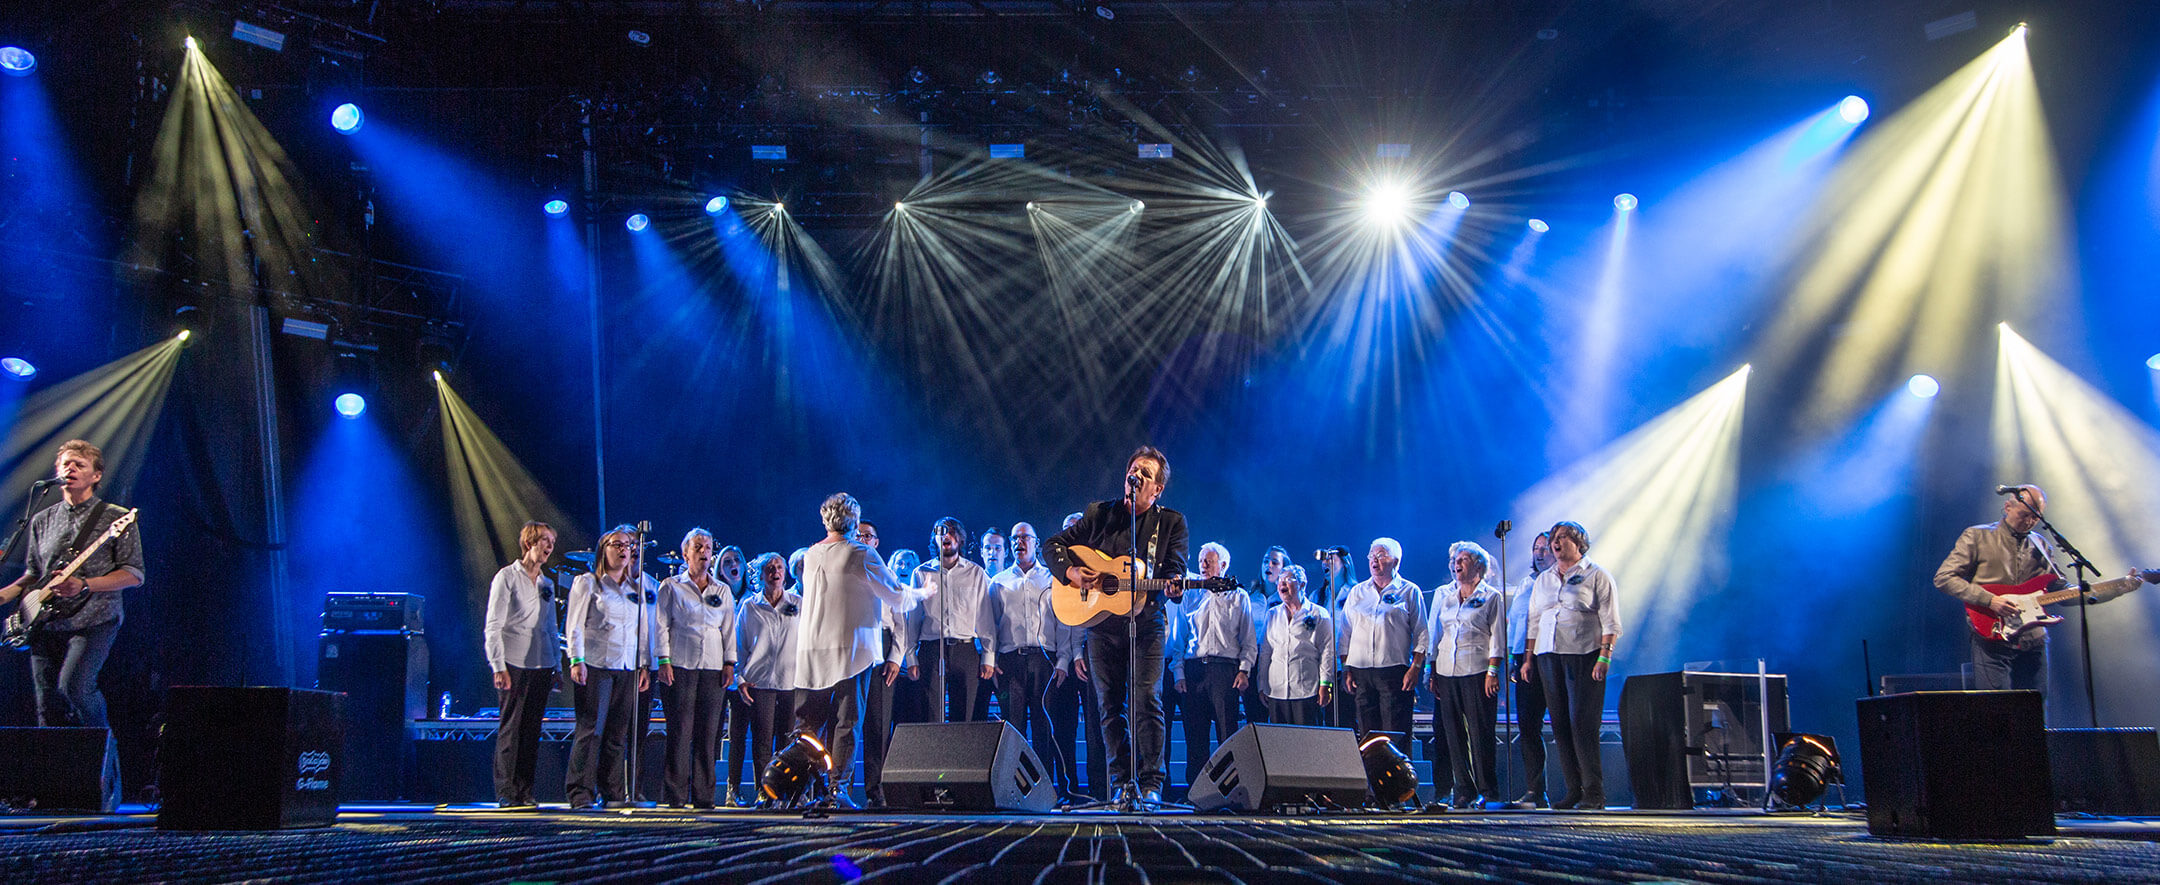 Glasgow Islay Gaelic Choir performing with Donnie Munro and Runrig at The Last Dance, August 2018.